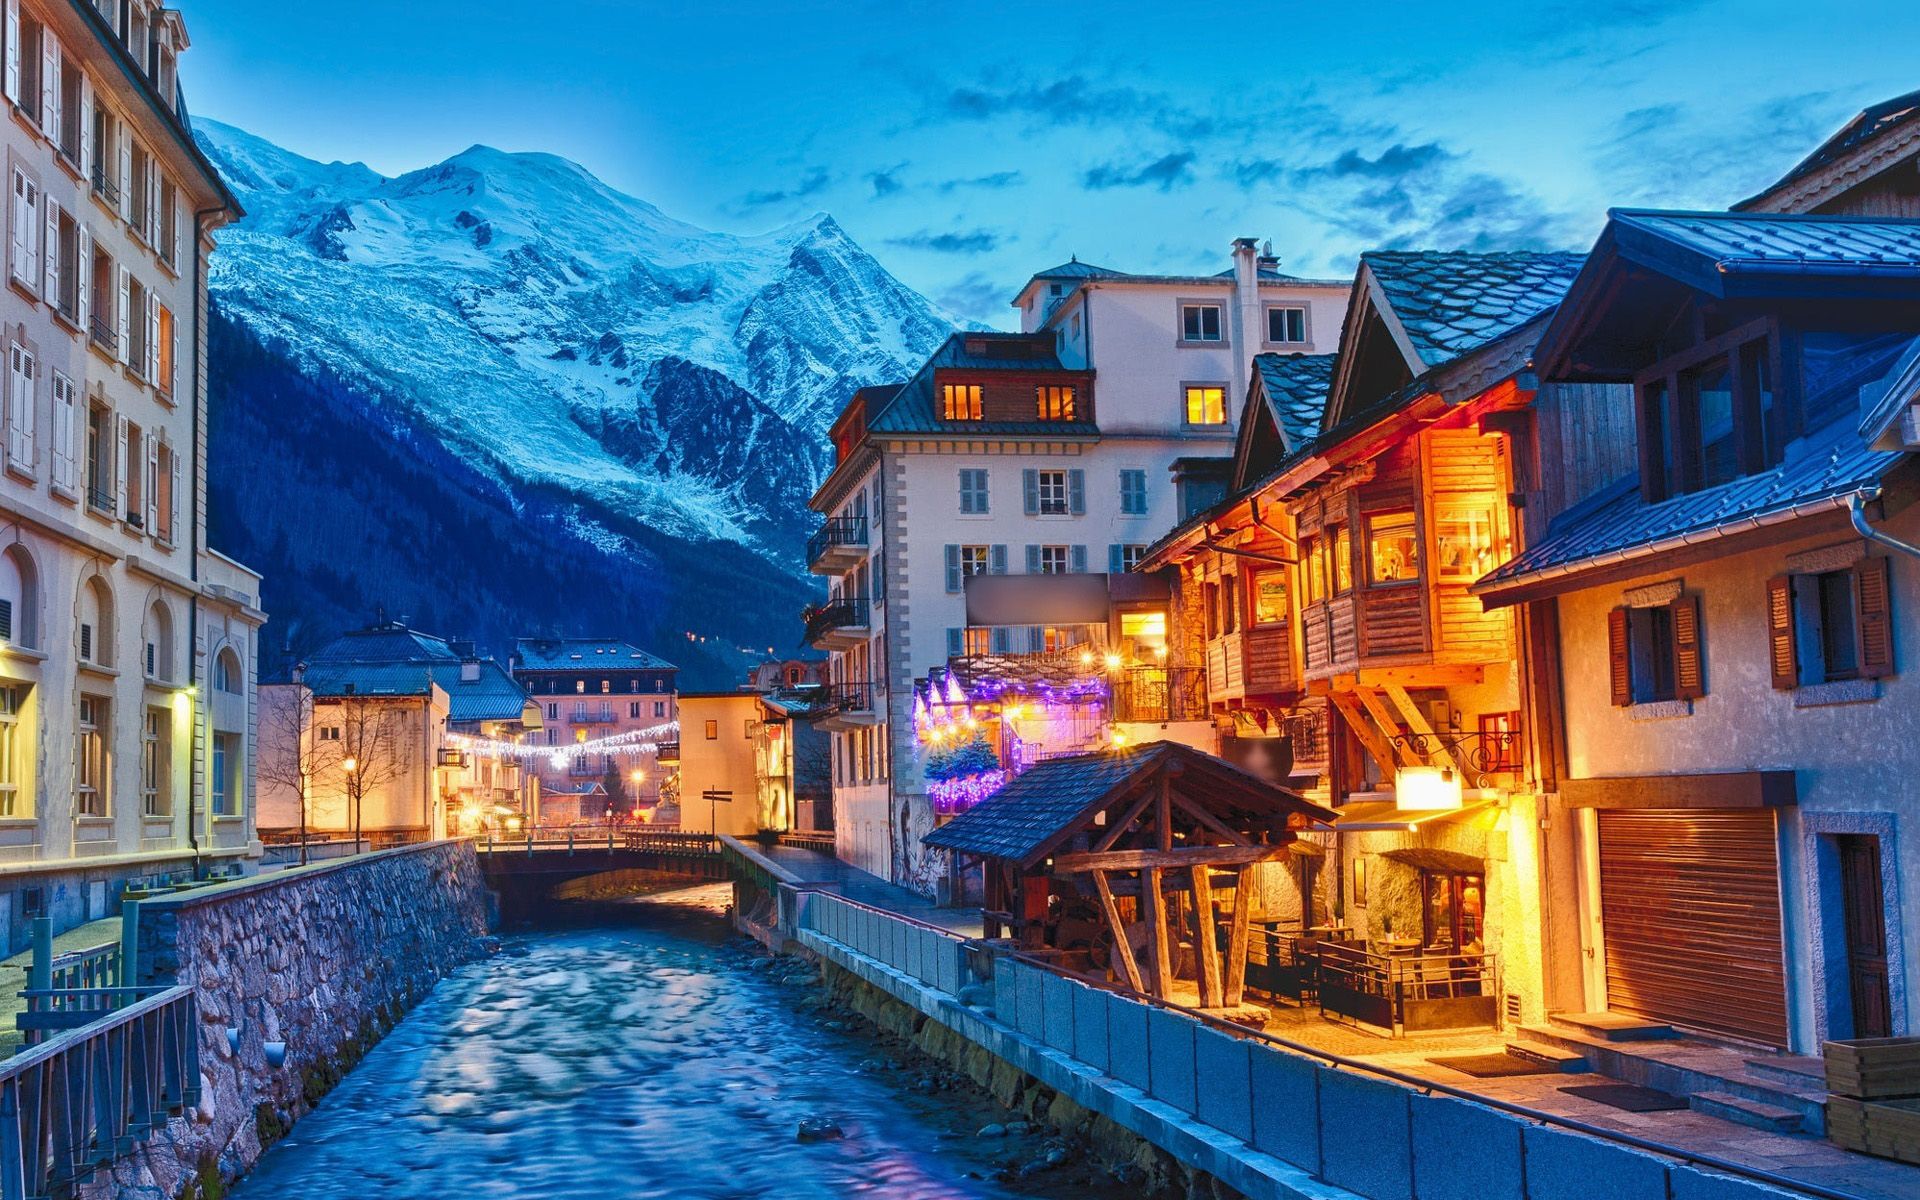 Download Wallpaper Chamonix Mont Blanc, Evening, Mountains, French Cities, Europe, France, Winter For Desktop With Resolution 1920x1200. High Quality HD Picture Wallpaper